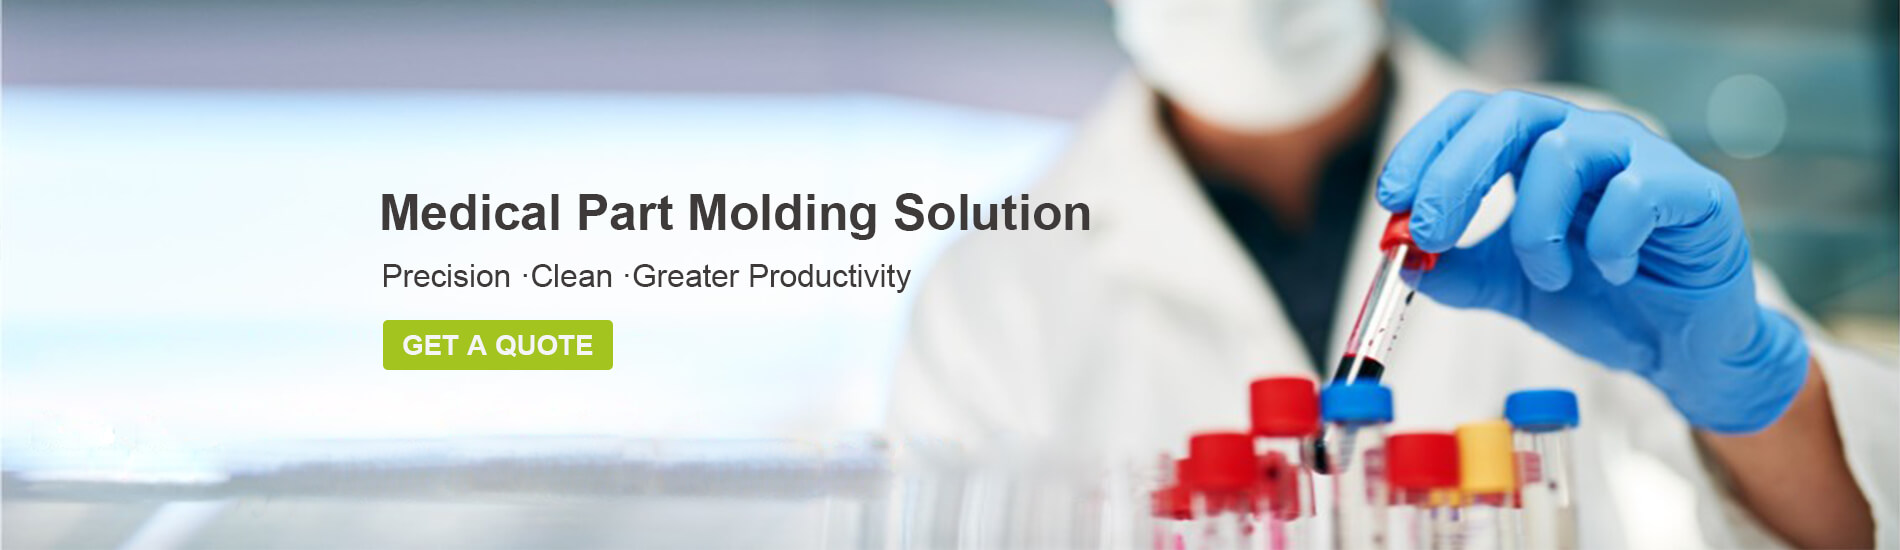 Logistic Injection Molding Solution